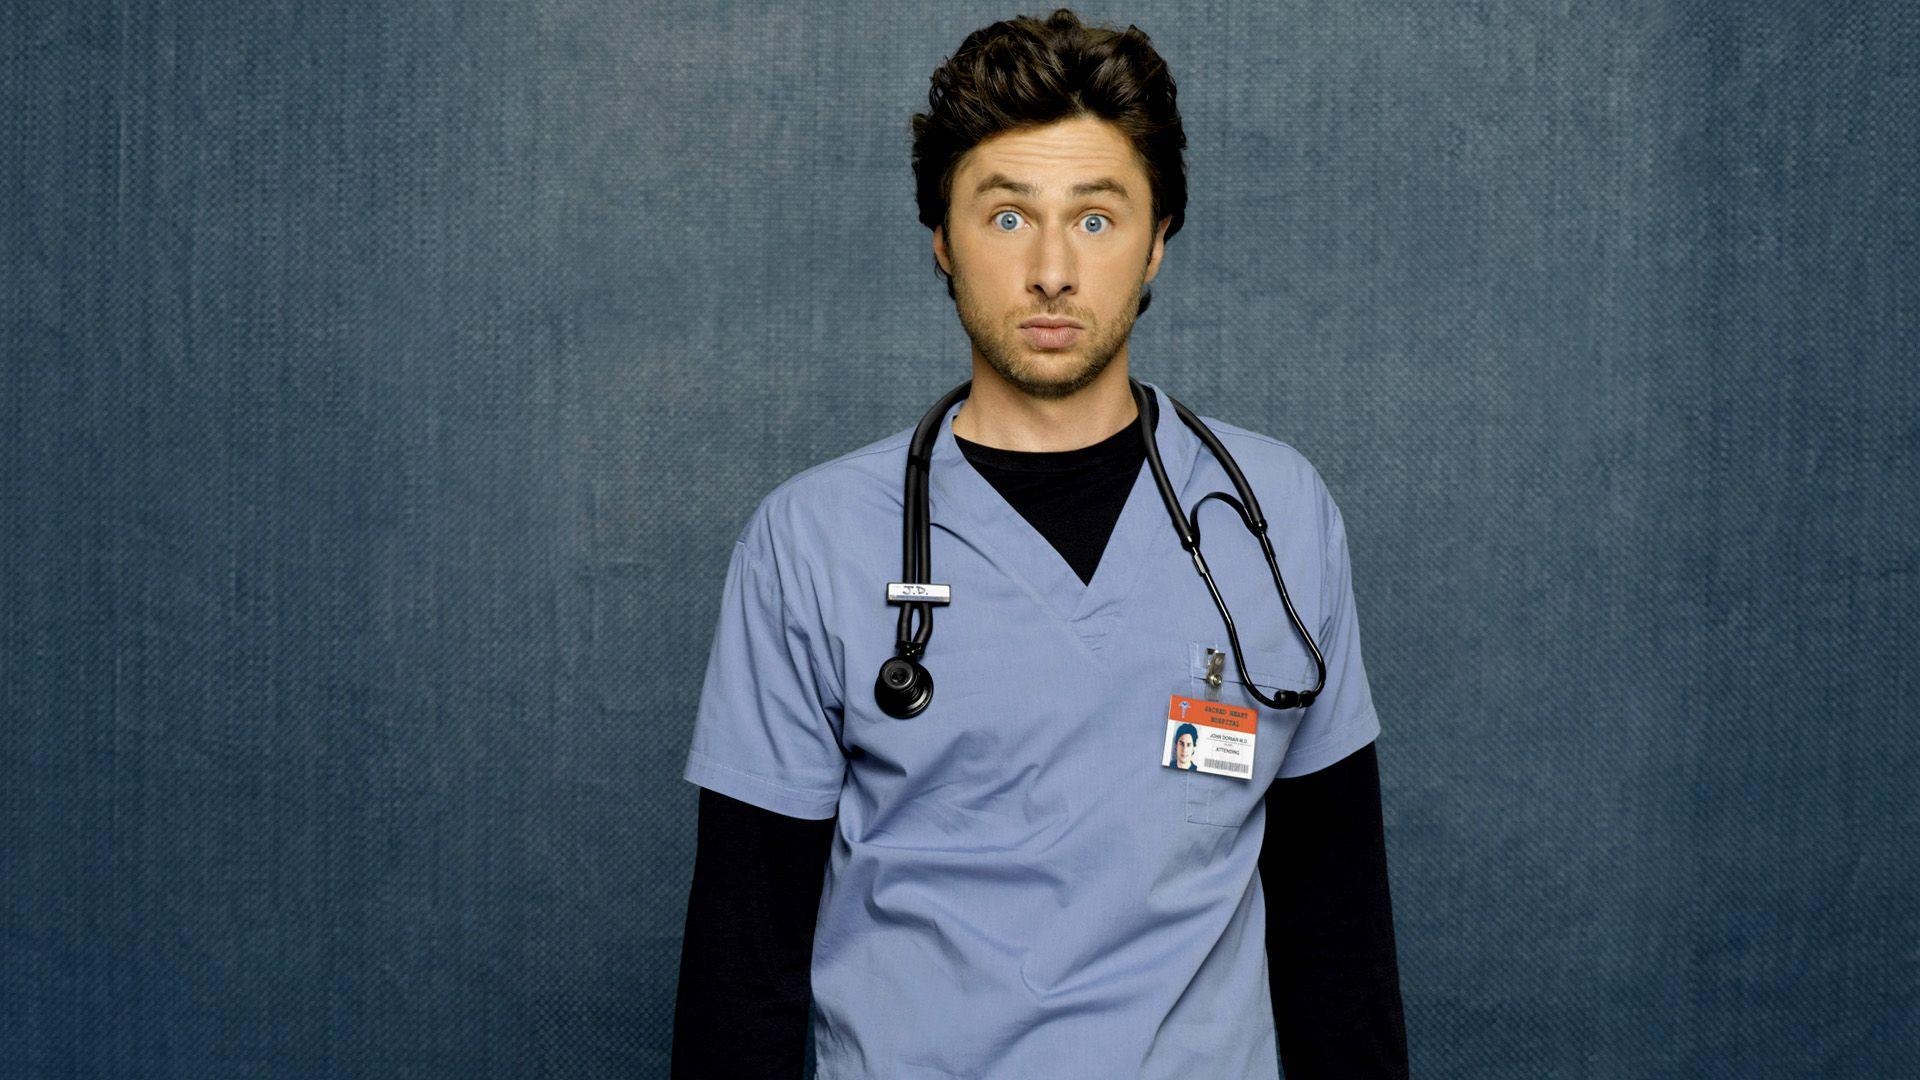 Zach Braff: Launched a Scrubs rewatch podcast titled Fake Doctors, Real Friends with Scrubs co-star Donald Faison in March 2020. 1920x1080 Full HD Background.